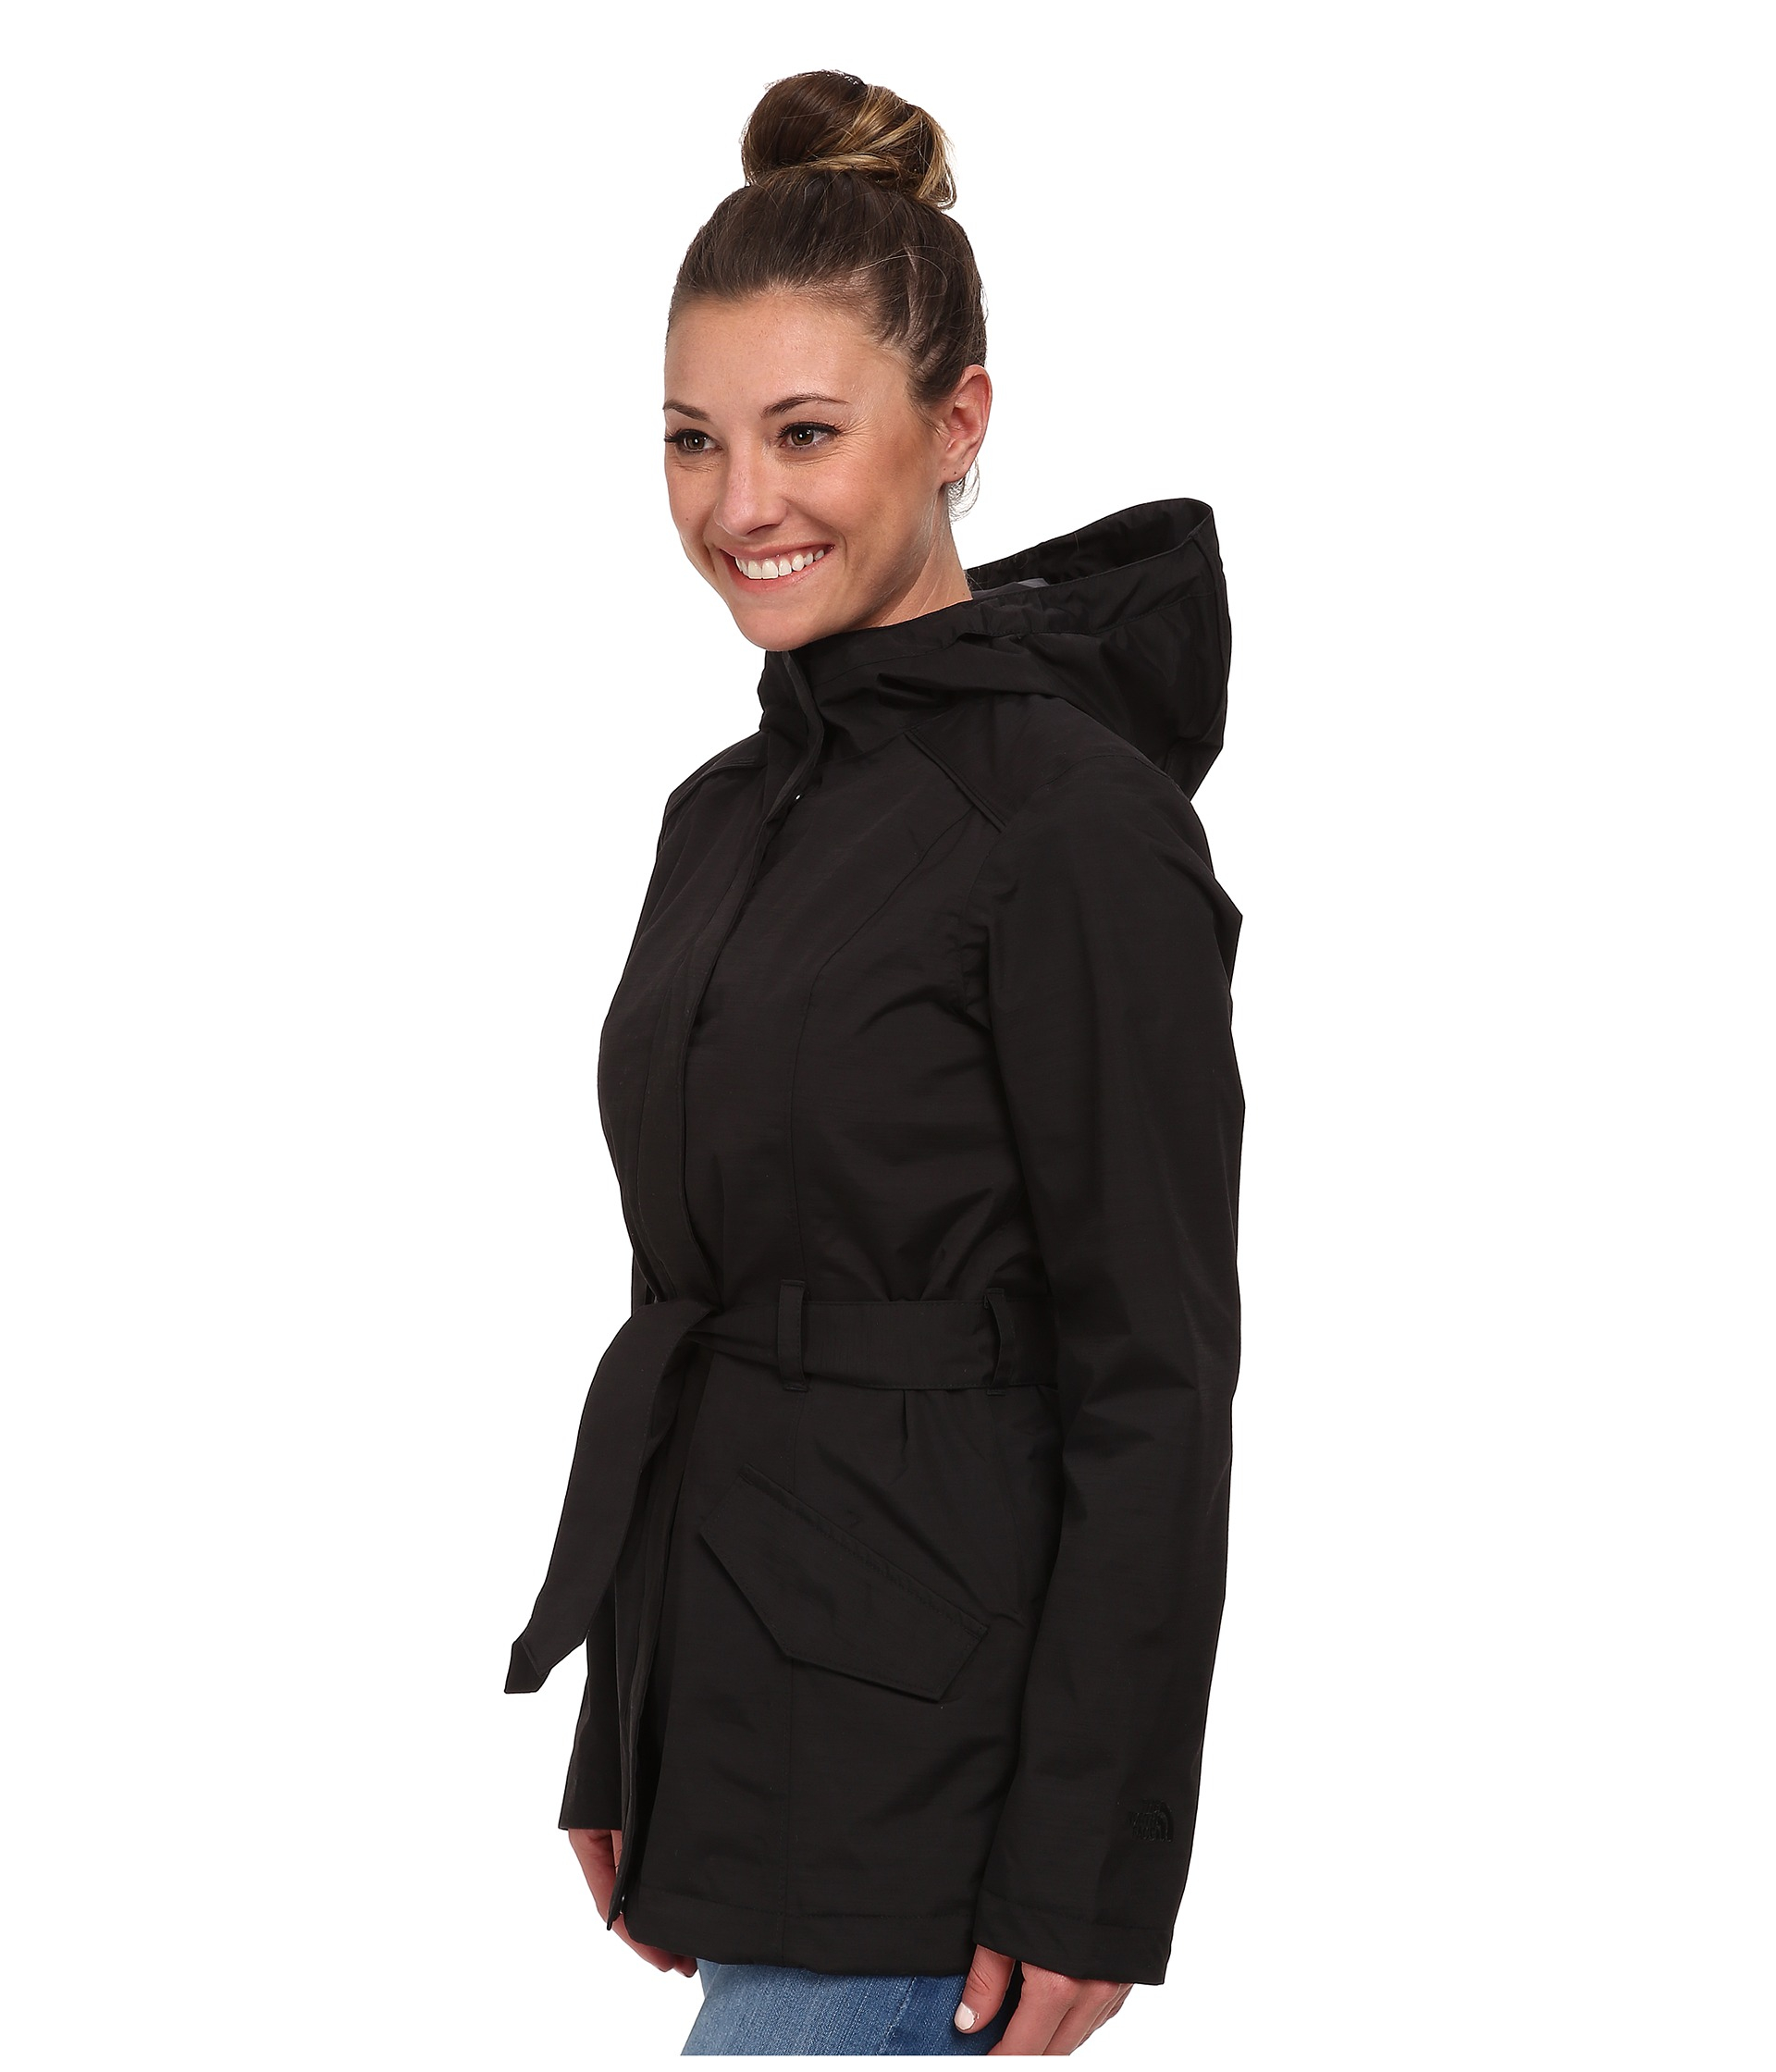 women's celeste hooded jacket the north face